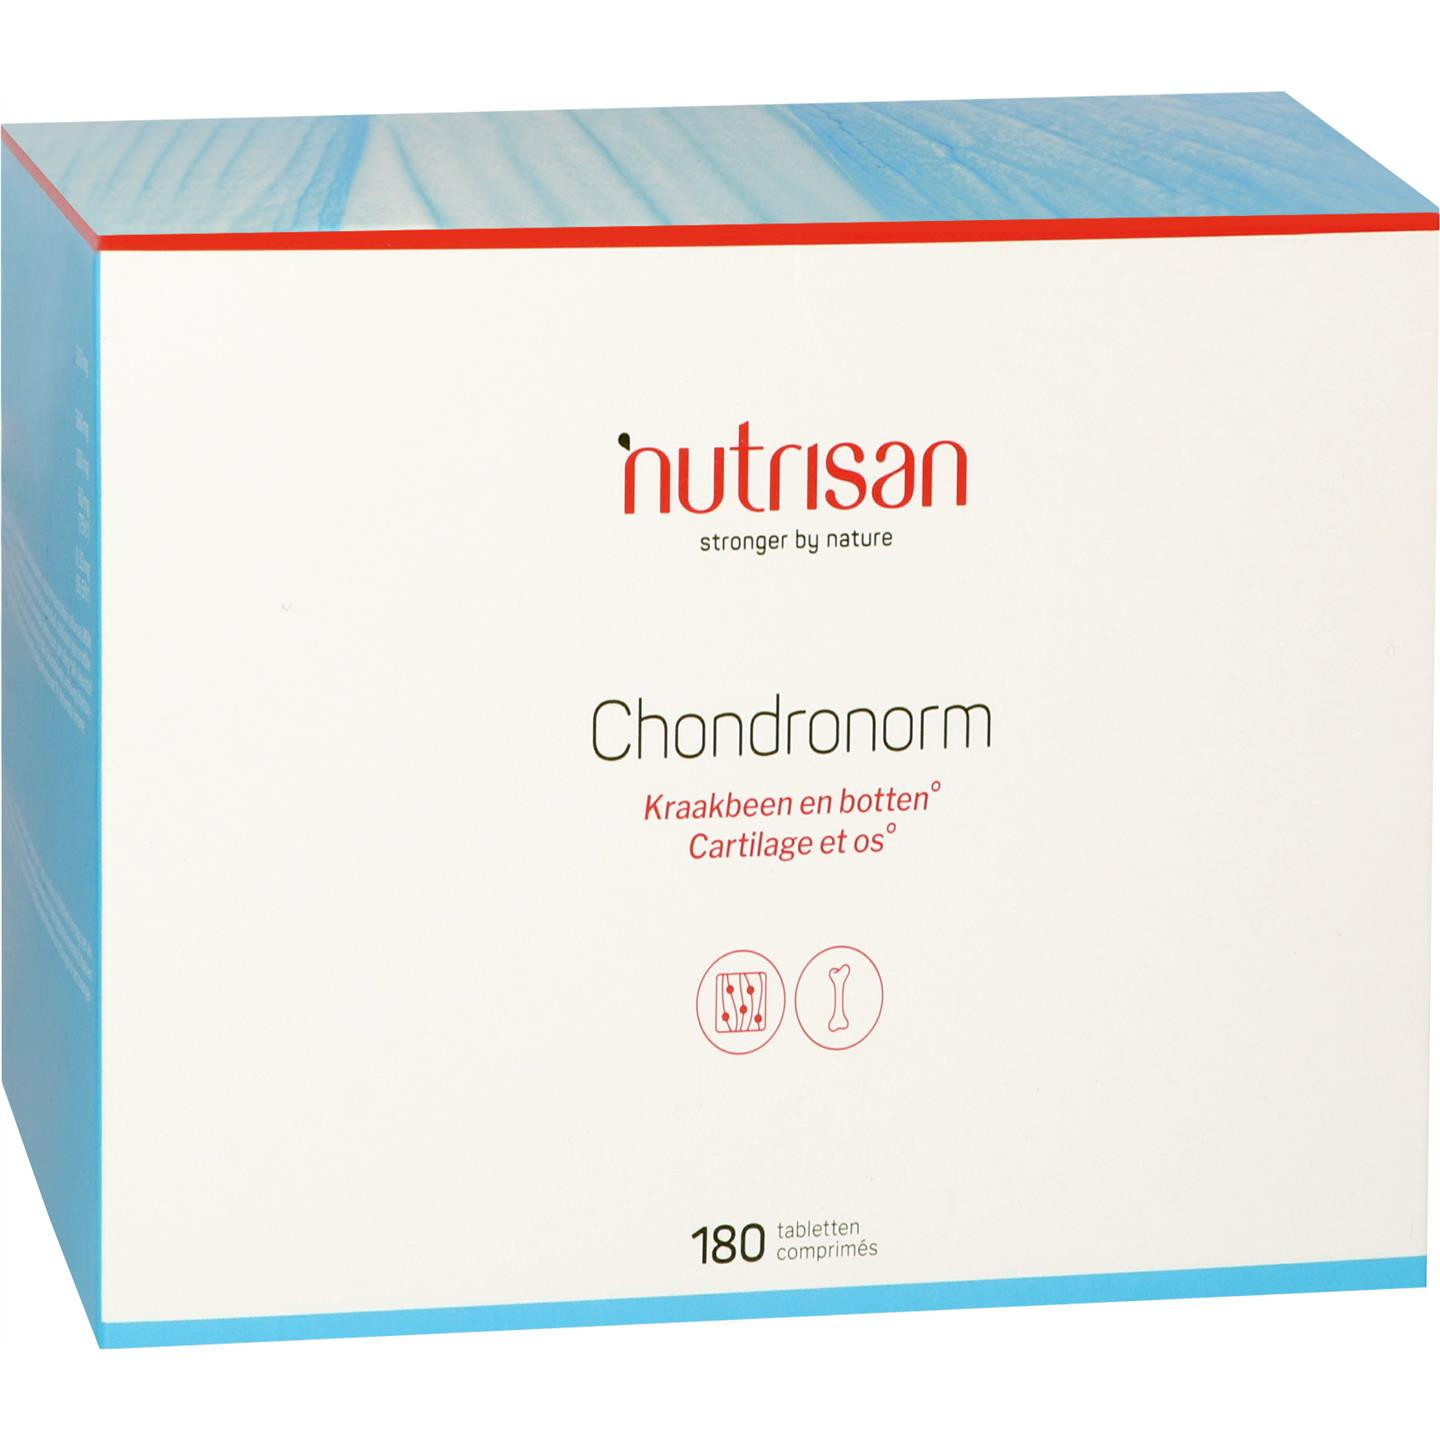 Chondronorm